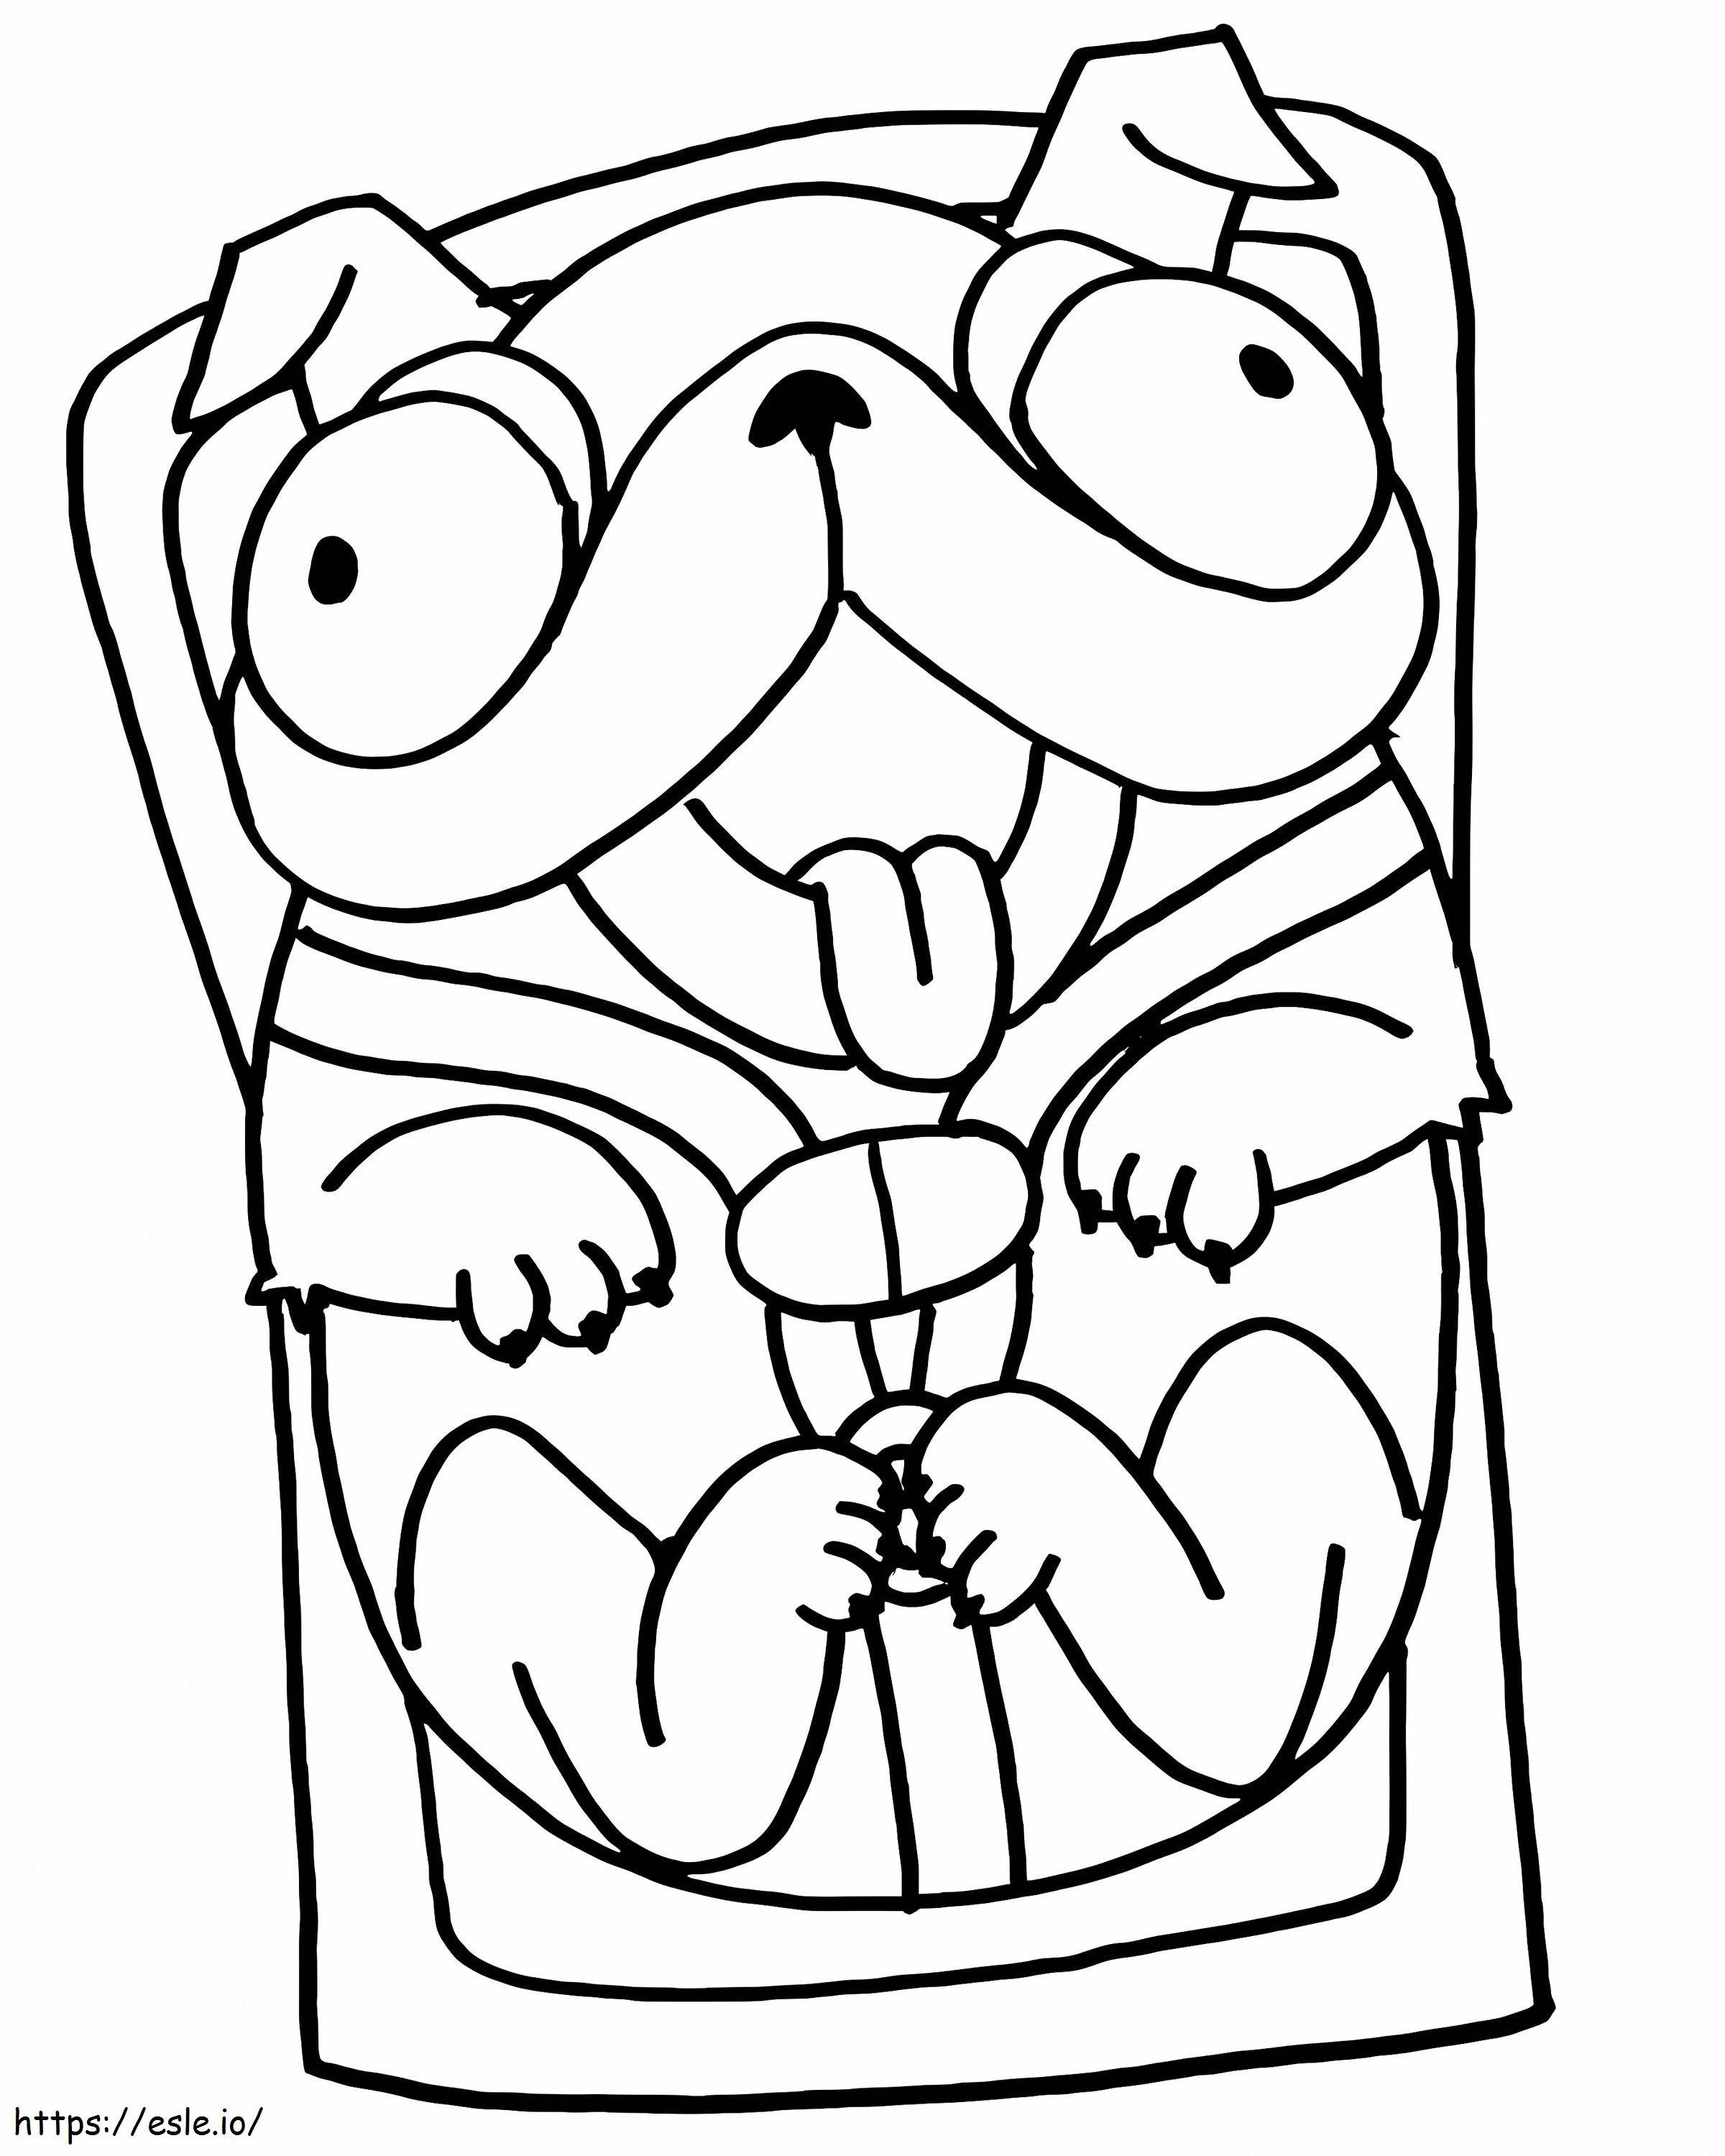 Funny Monchi coloring page